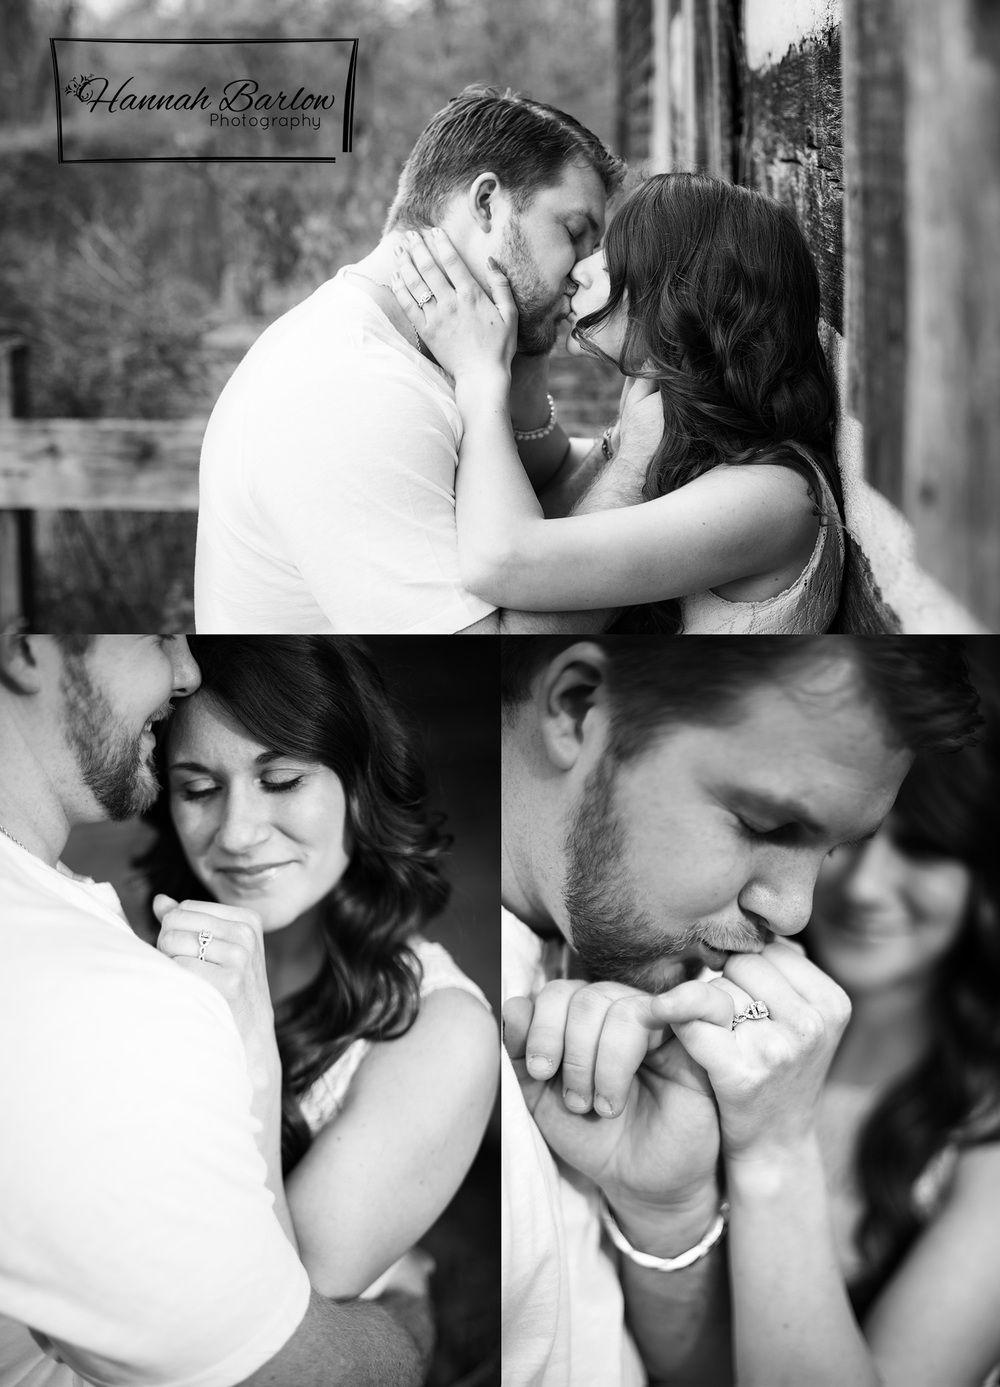  Engagement Photos Black and White 